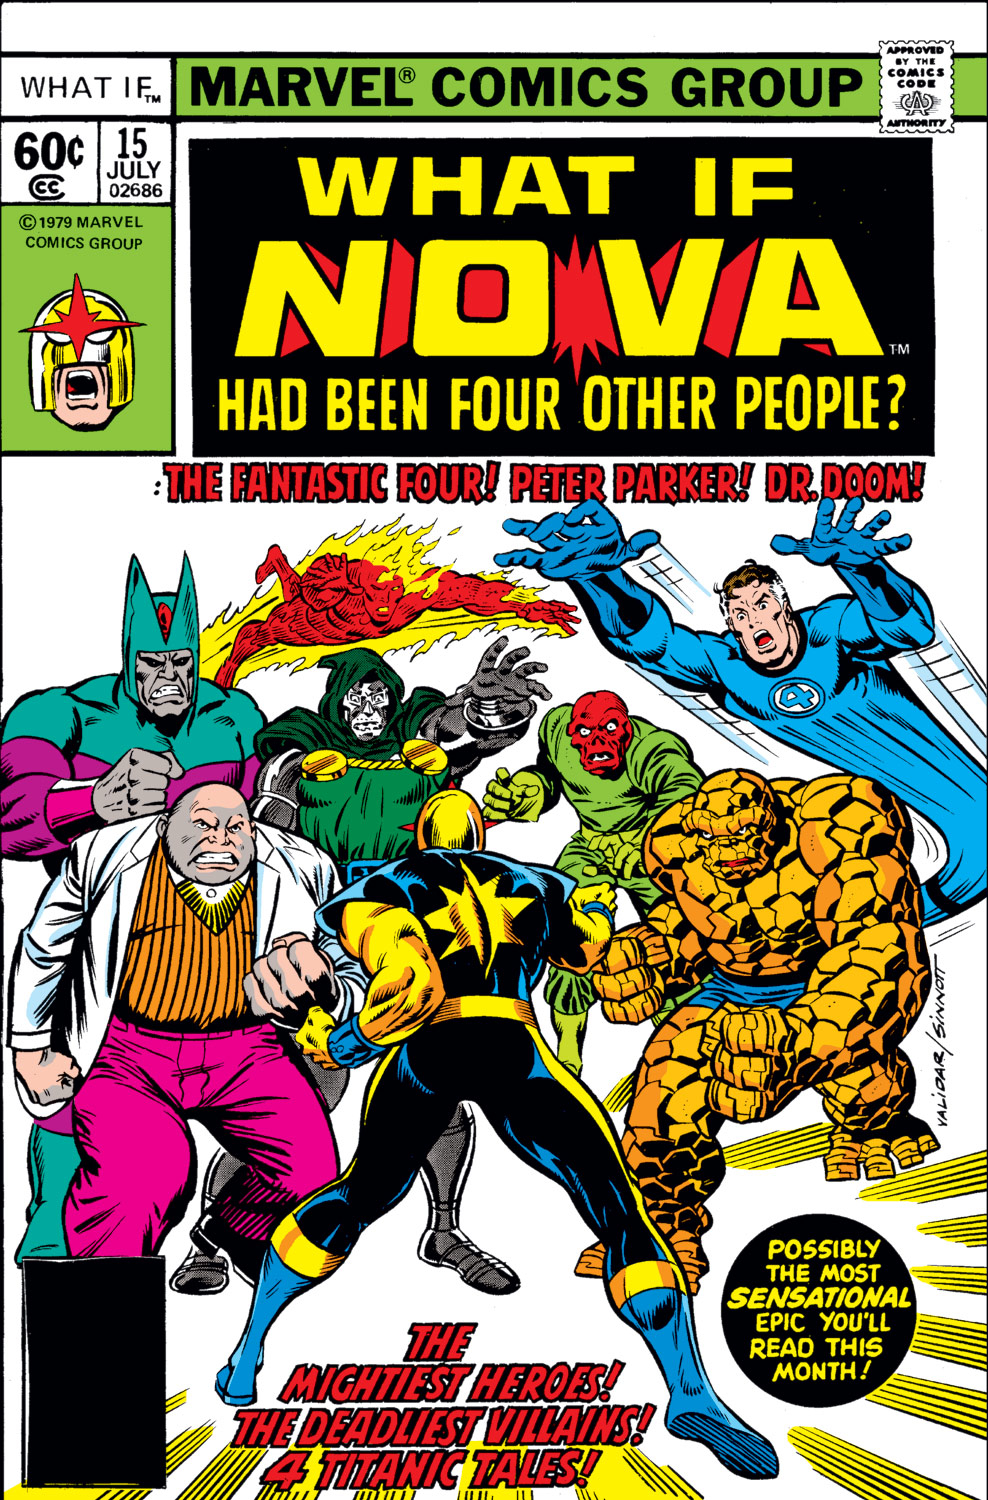 Read online What If? (1977) comic -  Issue #15 - Nova had been four other people - 1